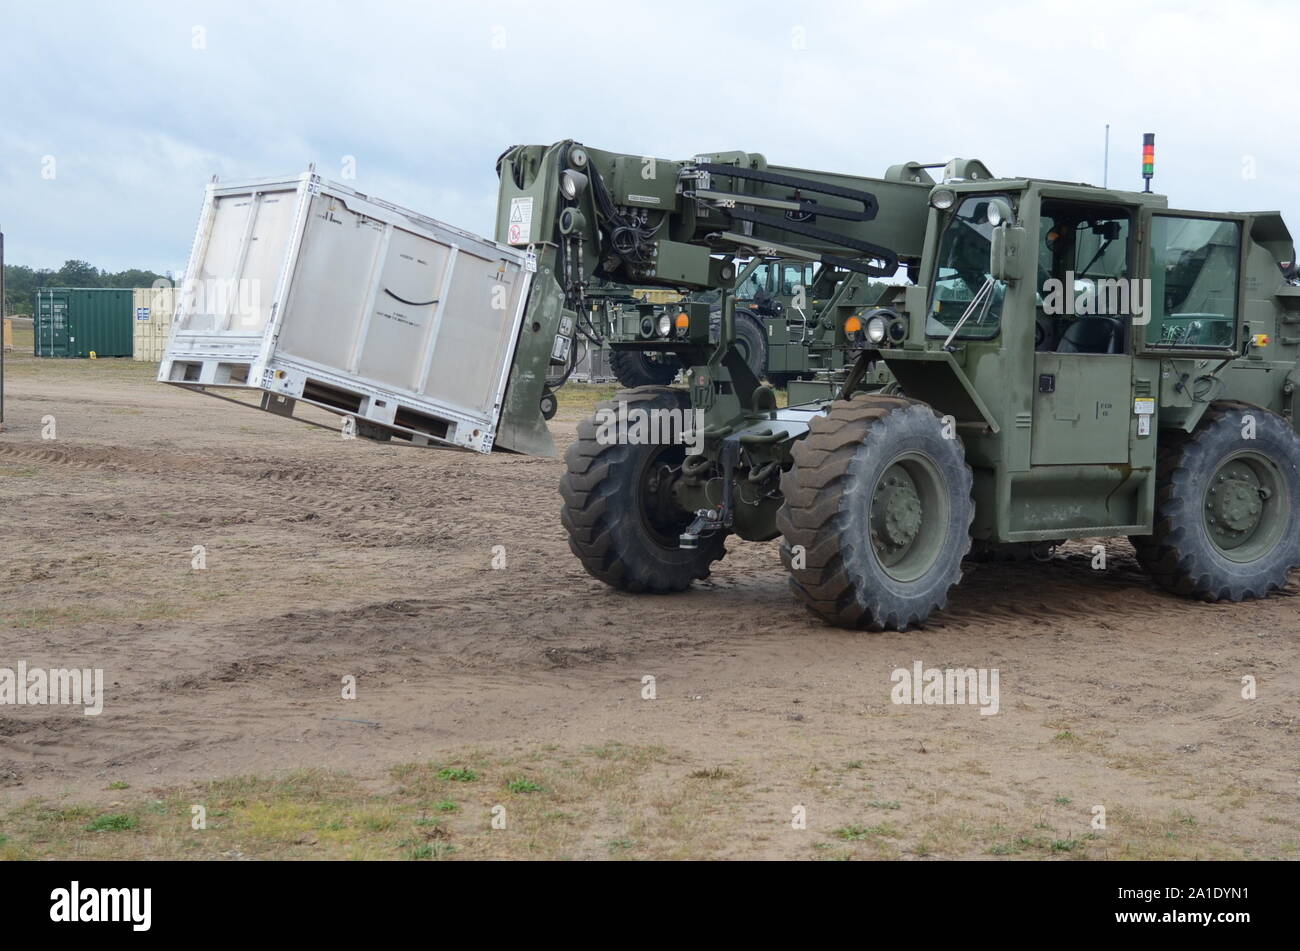 An unmanned forklift moves cargo around North FOB, Camp Grayling, Michigan, August 28, 2019.  Engineers, scientists, Soldiers and program managers from the U.S. Army Ground Vehicle Systems Center and the U.K.’s Defence Science and Technology Laboratory demonstrate the Coalition Autonomous Assured Resupply project, highlight the interoperability of the two nations’ armies with autonomous driving technology.  [U.S. Army photo by Jerome Aliotta//Released] Stock Photo